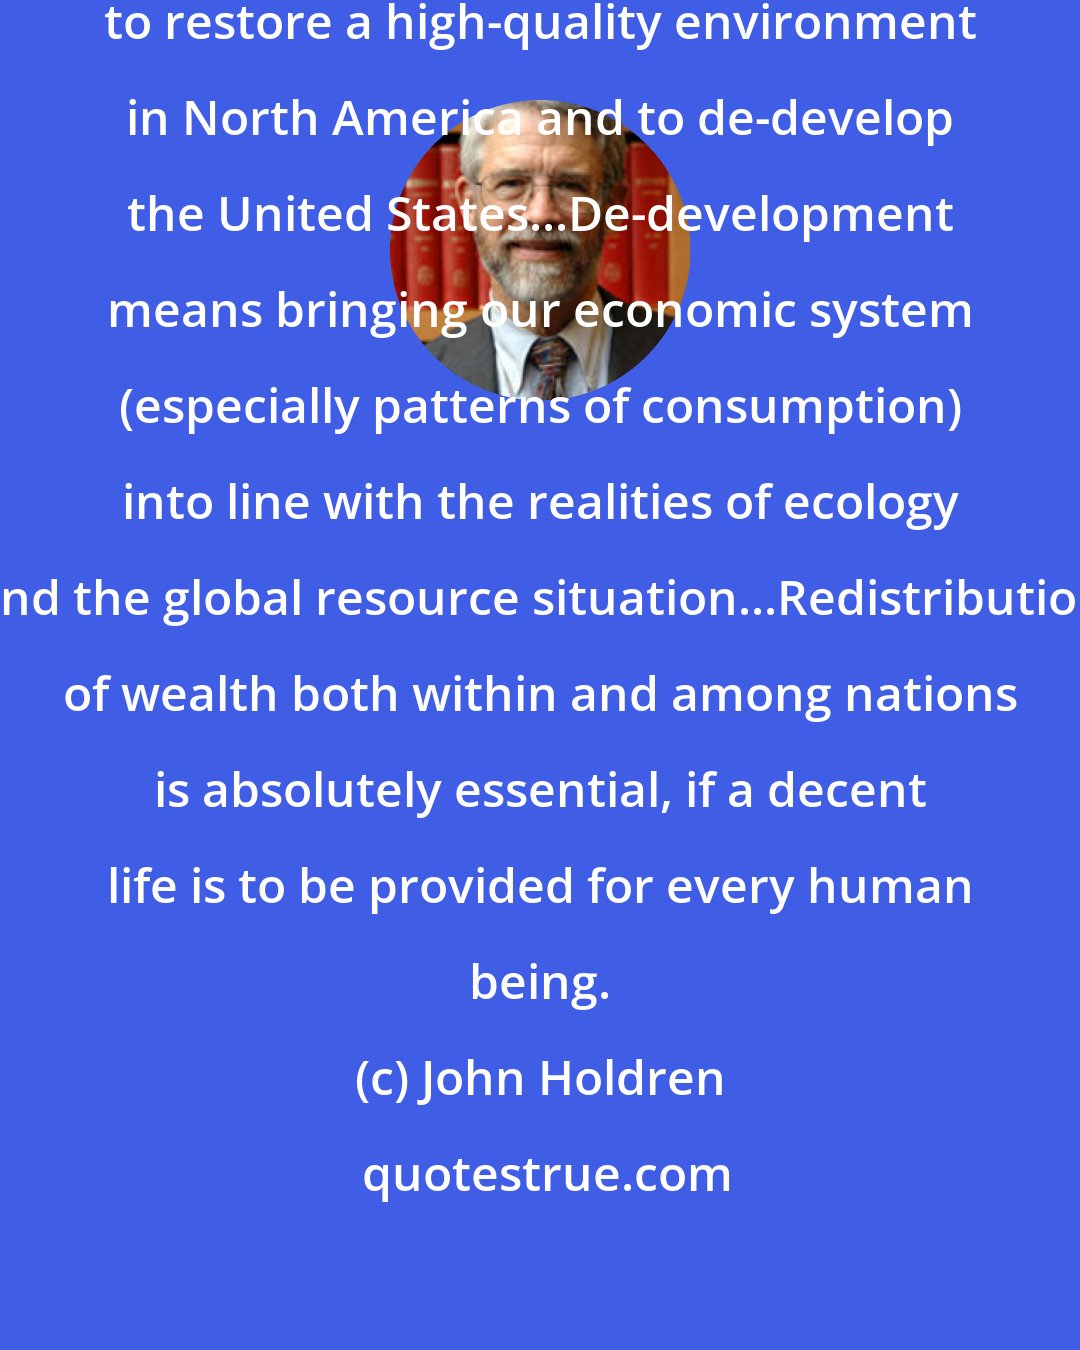 John Holdren: A massive campaign must be launched to restore a high-quality environment in North America and to de-develop the United States...De-development means bringing our economic system (especially patterns of consumption) into line with the realities of ecology and the global resource situation...Redistribution of wealth both within and among nations is absolutely essential, if a decent life is to be provided for every human being.